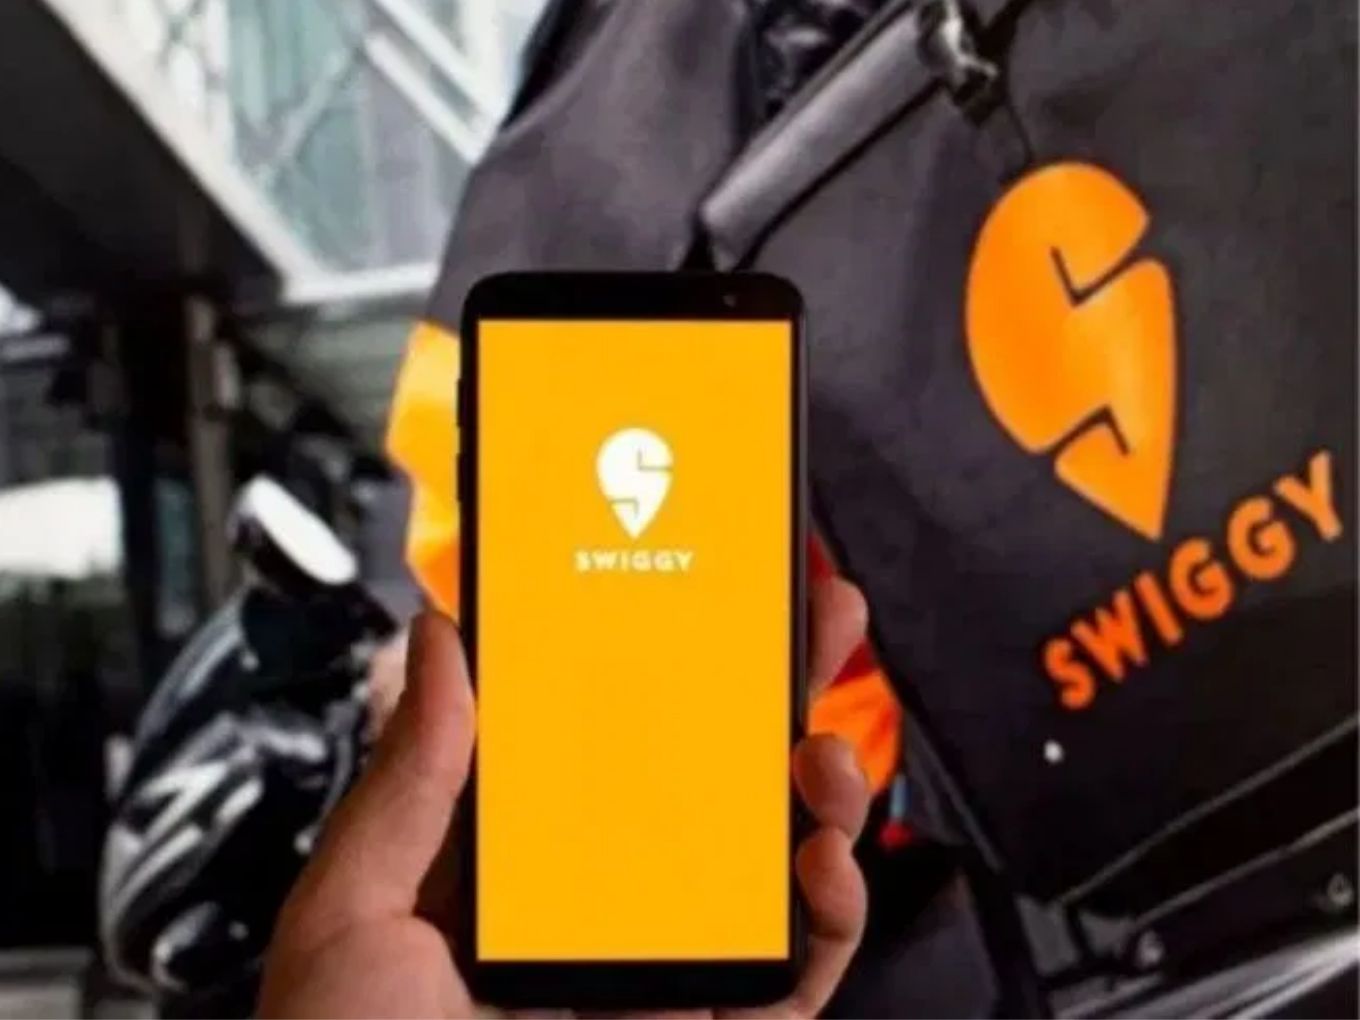 With Food Orders Stuck, Swiggy Looks To Ramp Up Grocery Delivery